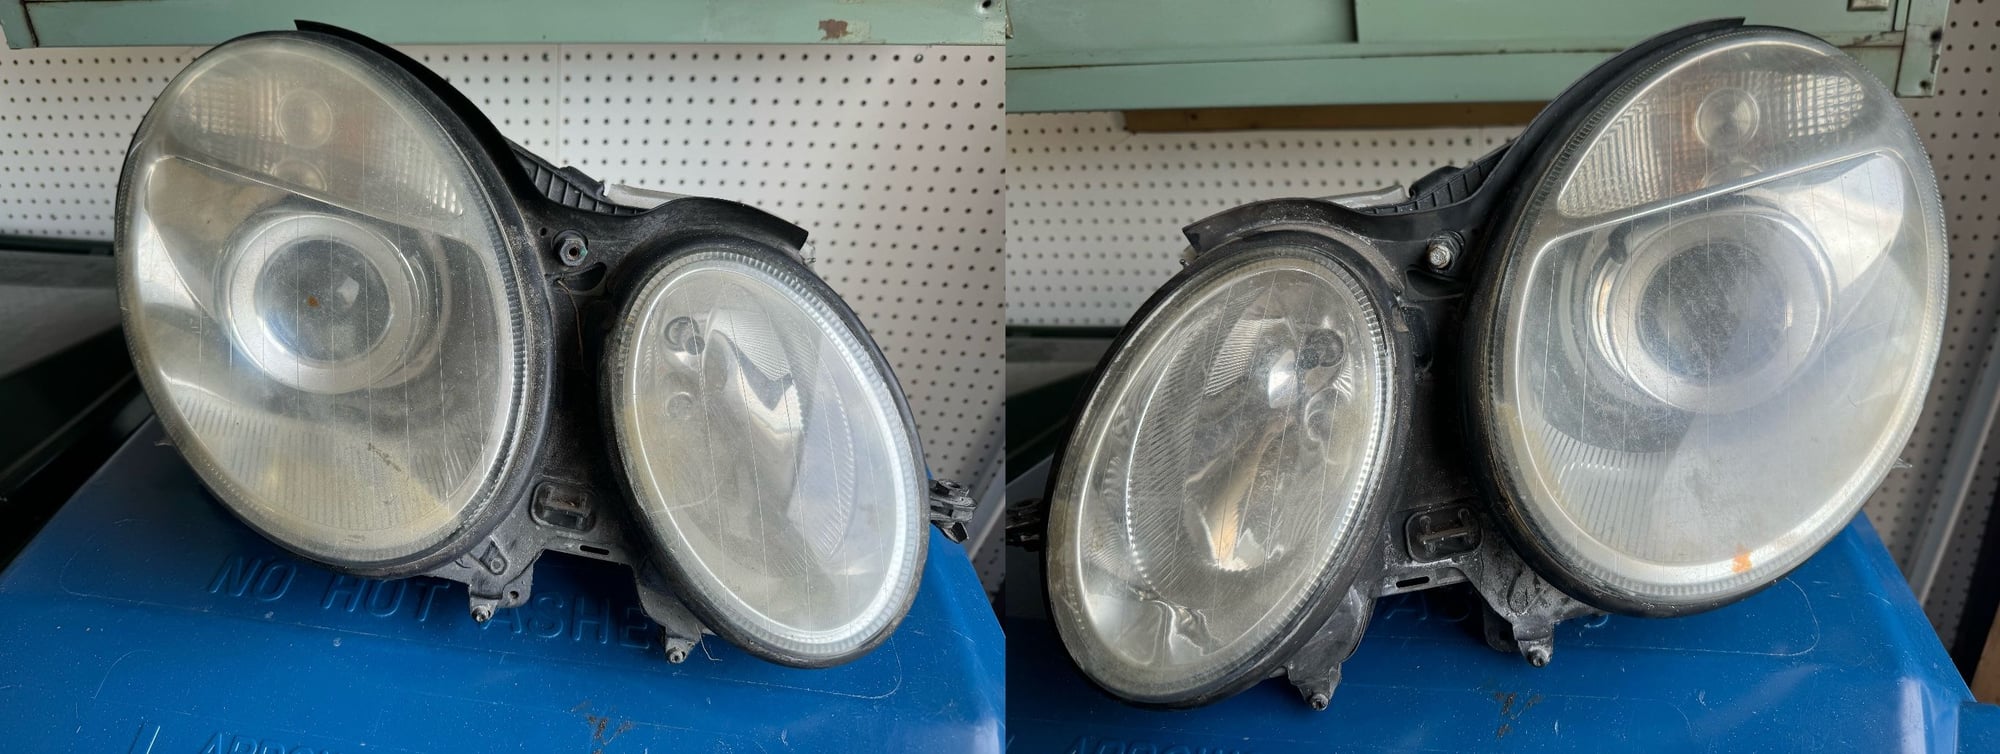 2005 Mercedes-Benz E55 AMG - Pair of Mercedes Benz w211 E-Class 2003-2006 Halogen Headlights - Accessories - $100 - Cleveland, OH 44116, United States